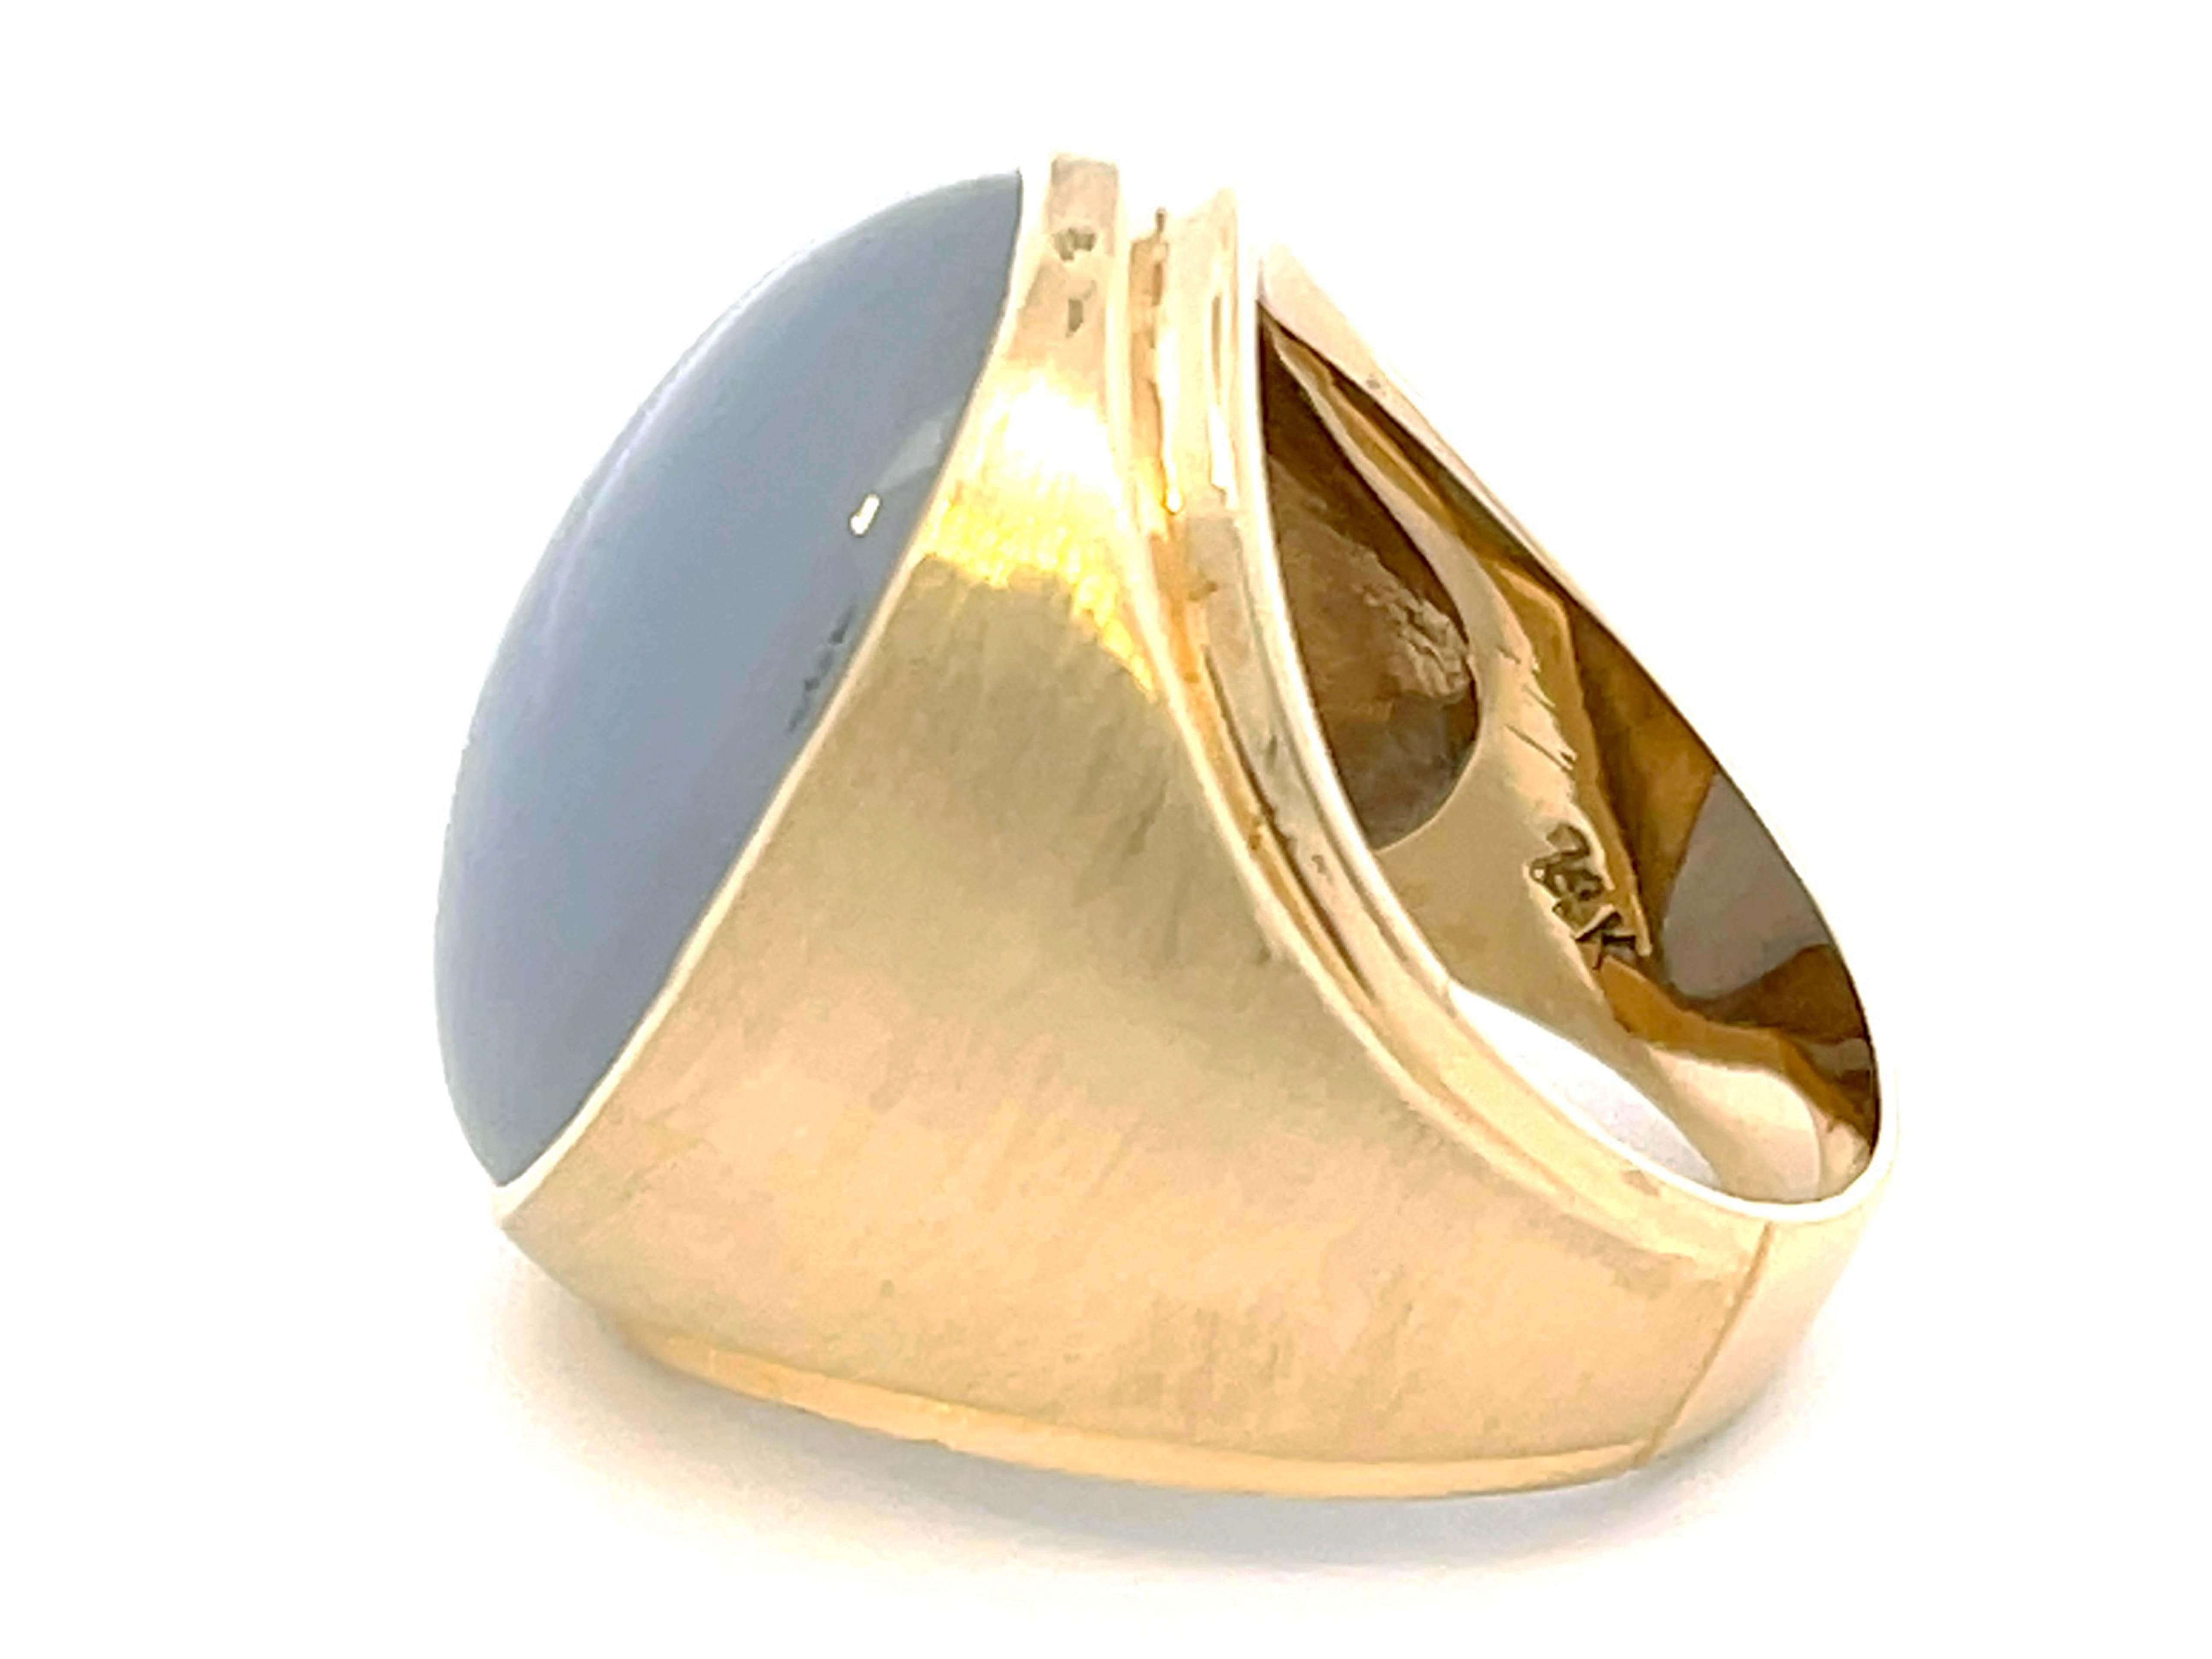 Lavender Oval Cabochon Jade Ring with Satin Finish in 14k Yellow Gold 1